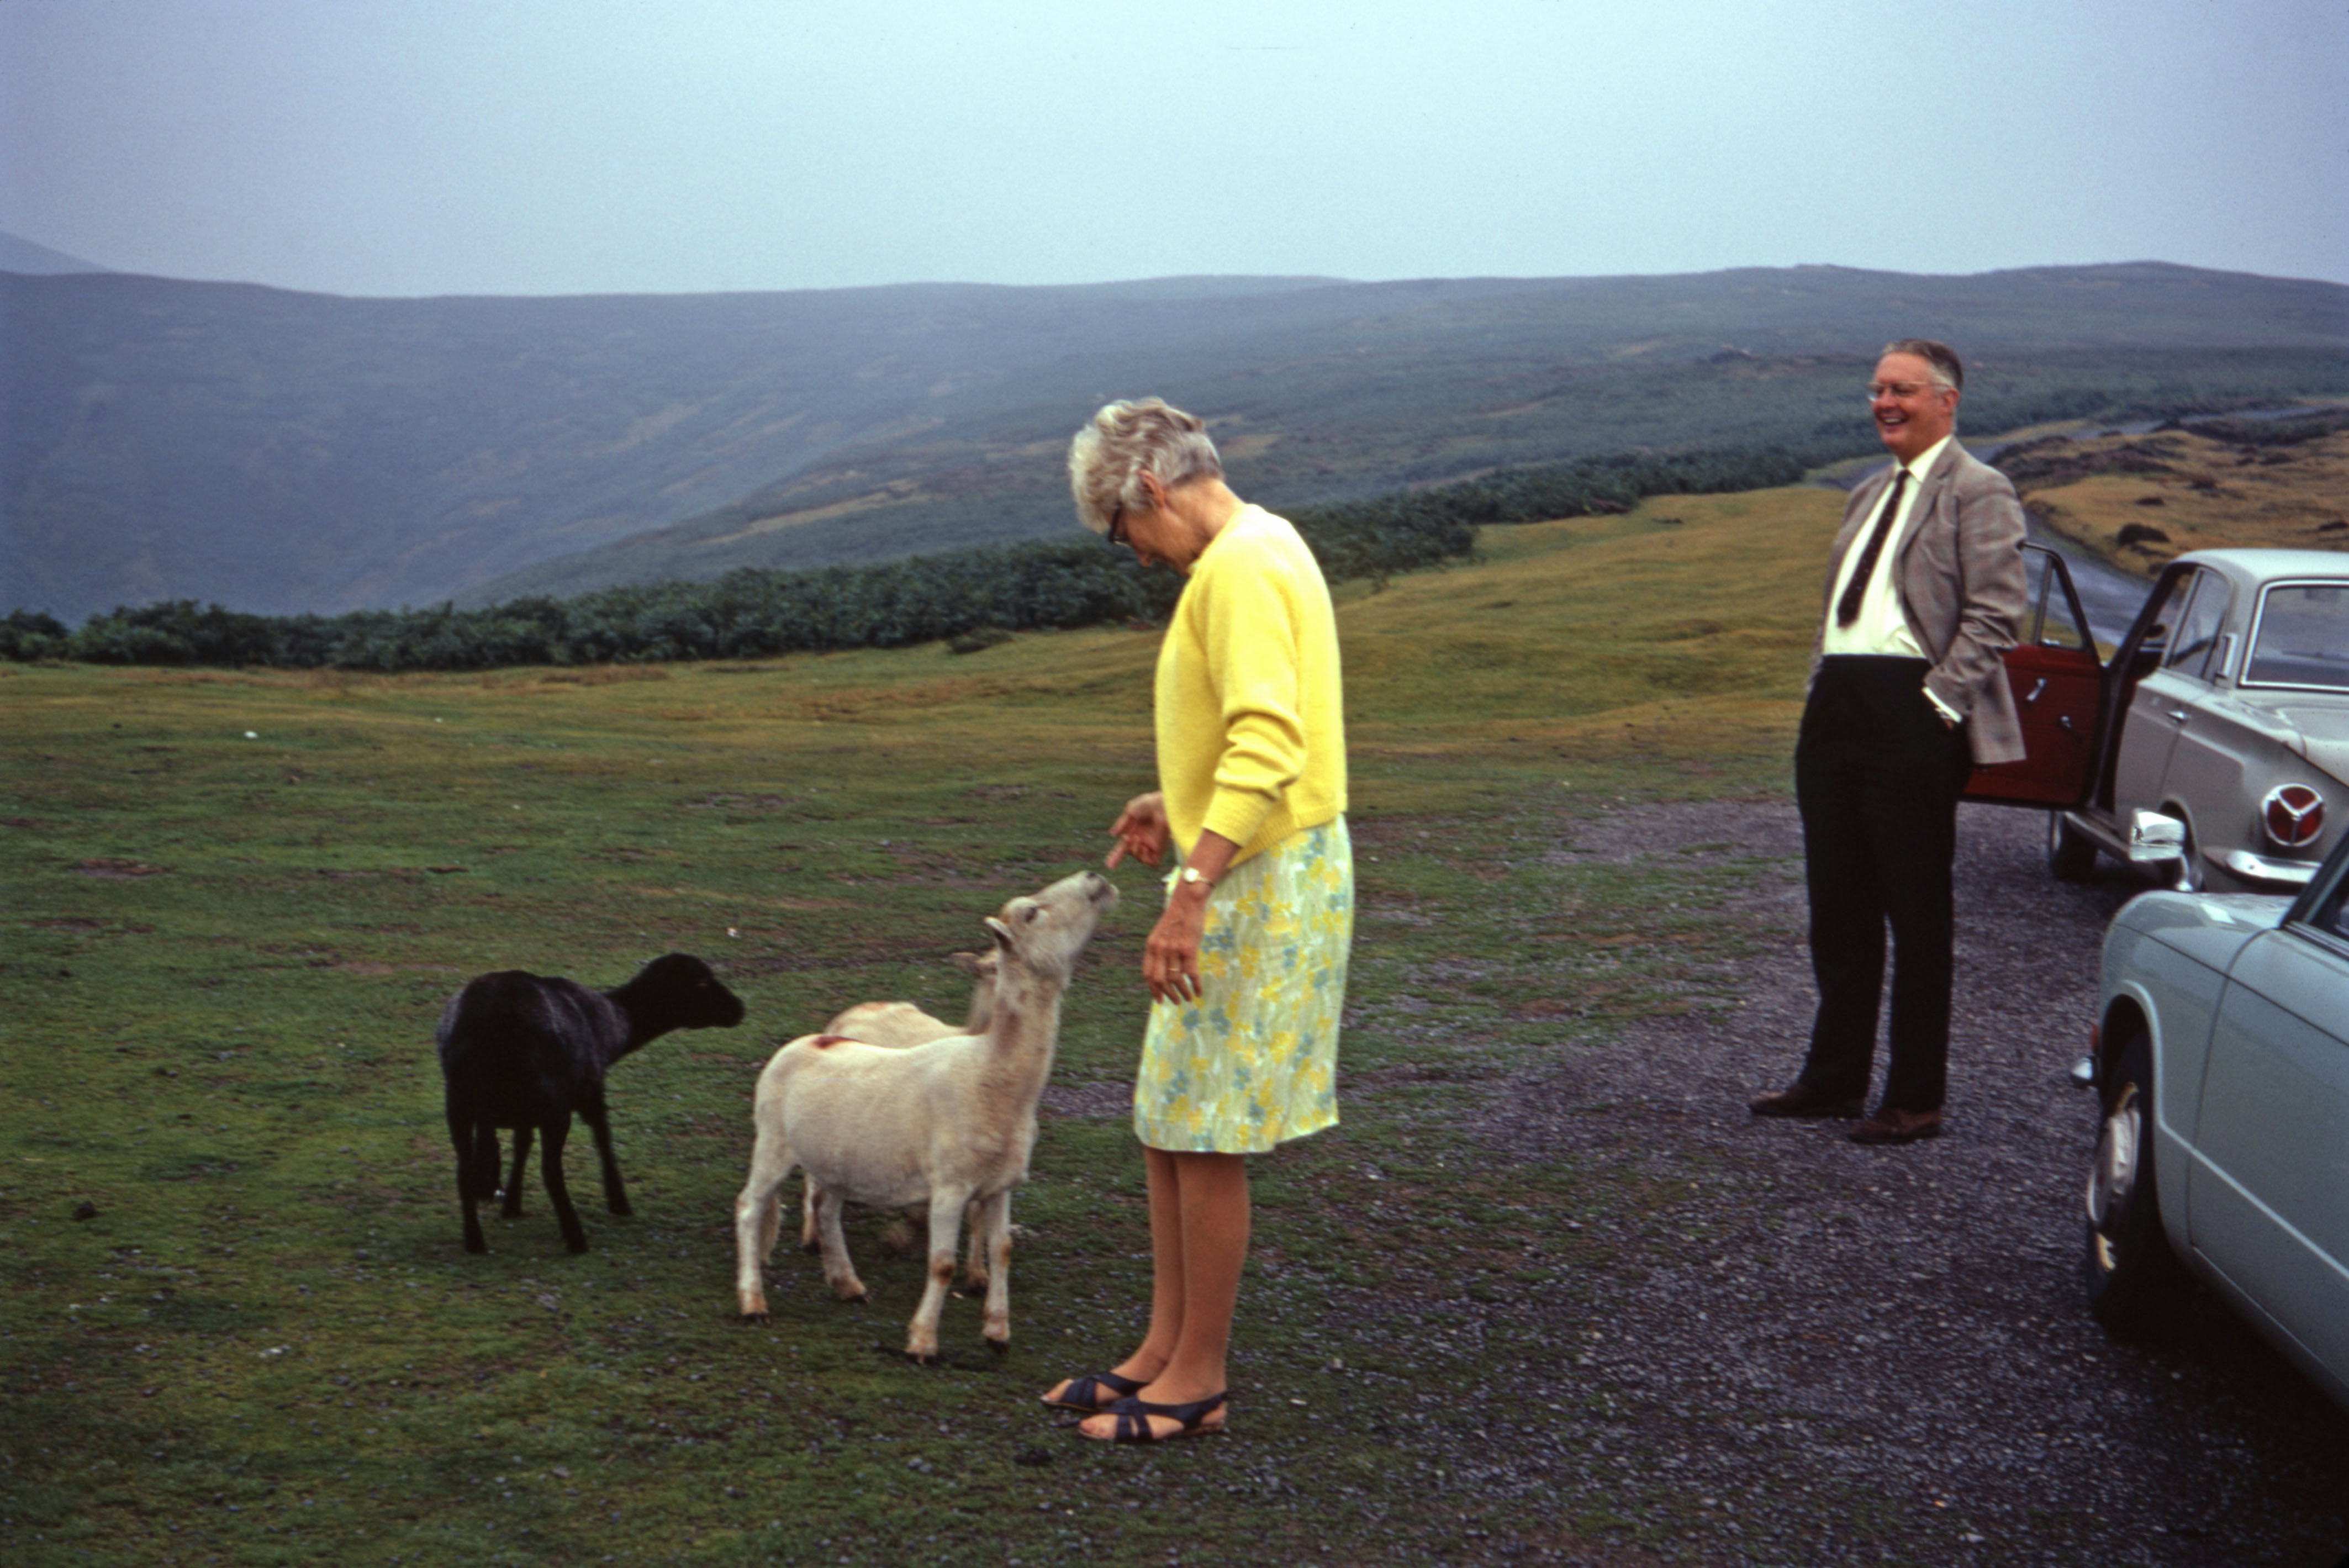 13 Aug 1969 Joan & Fred with the sheep at Long Mynd after Edward's wedding